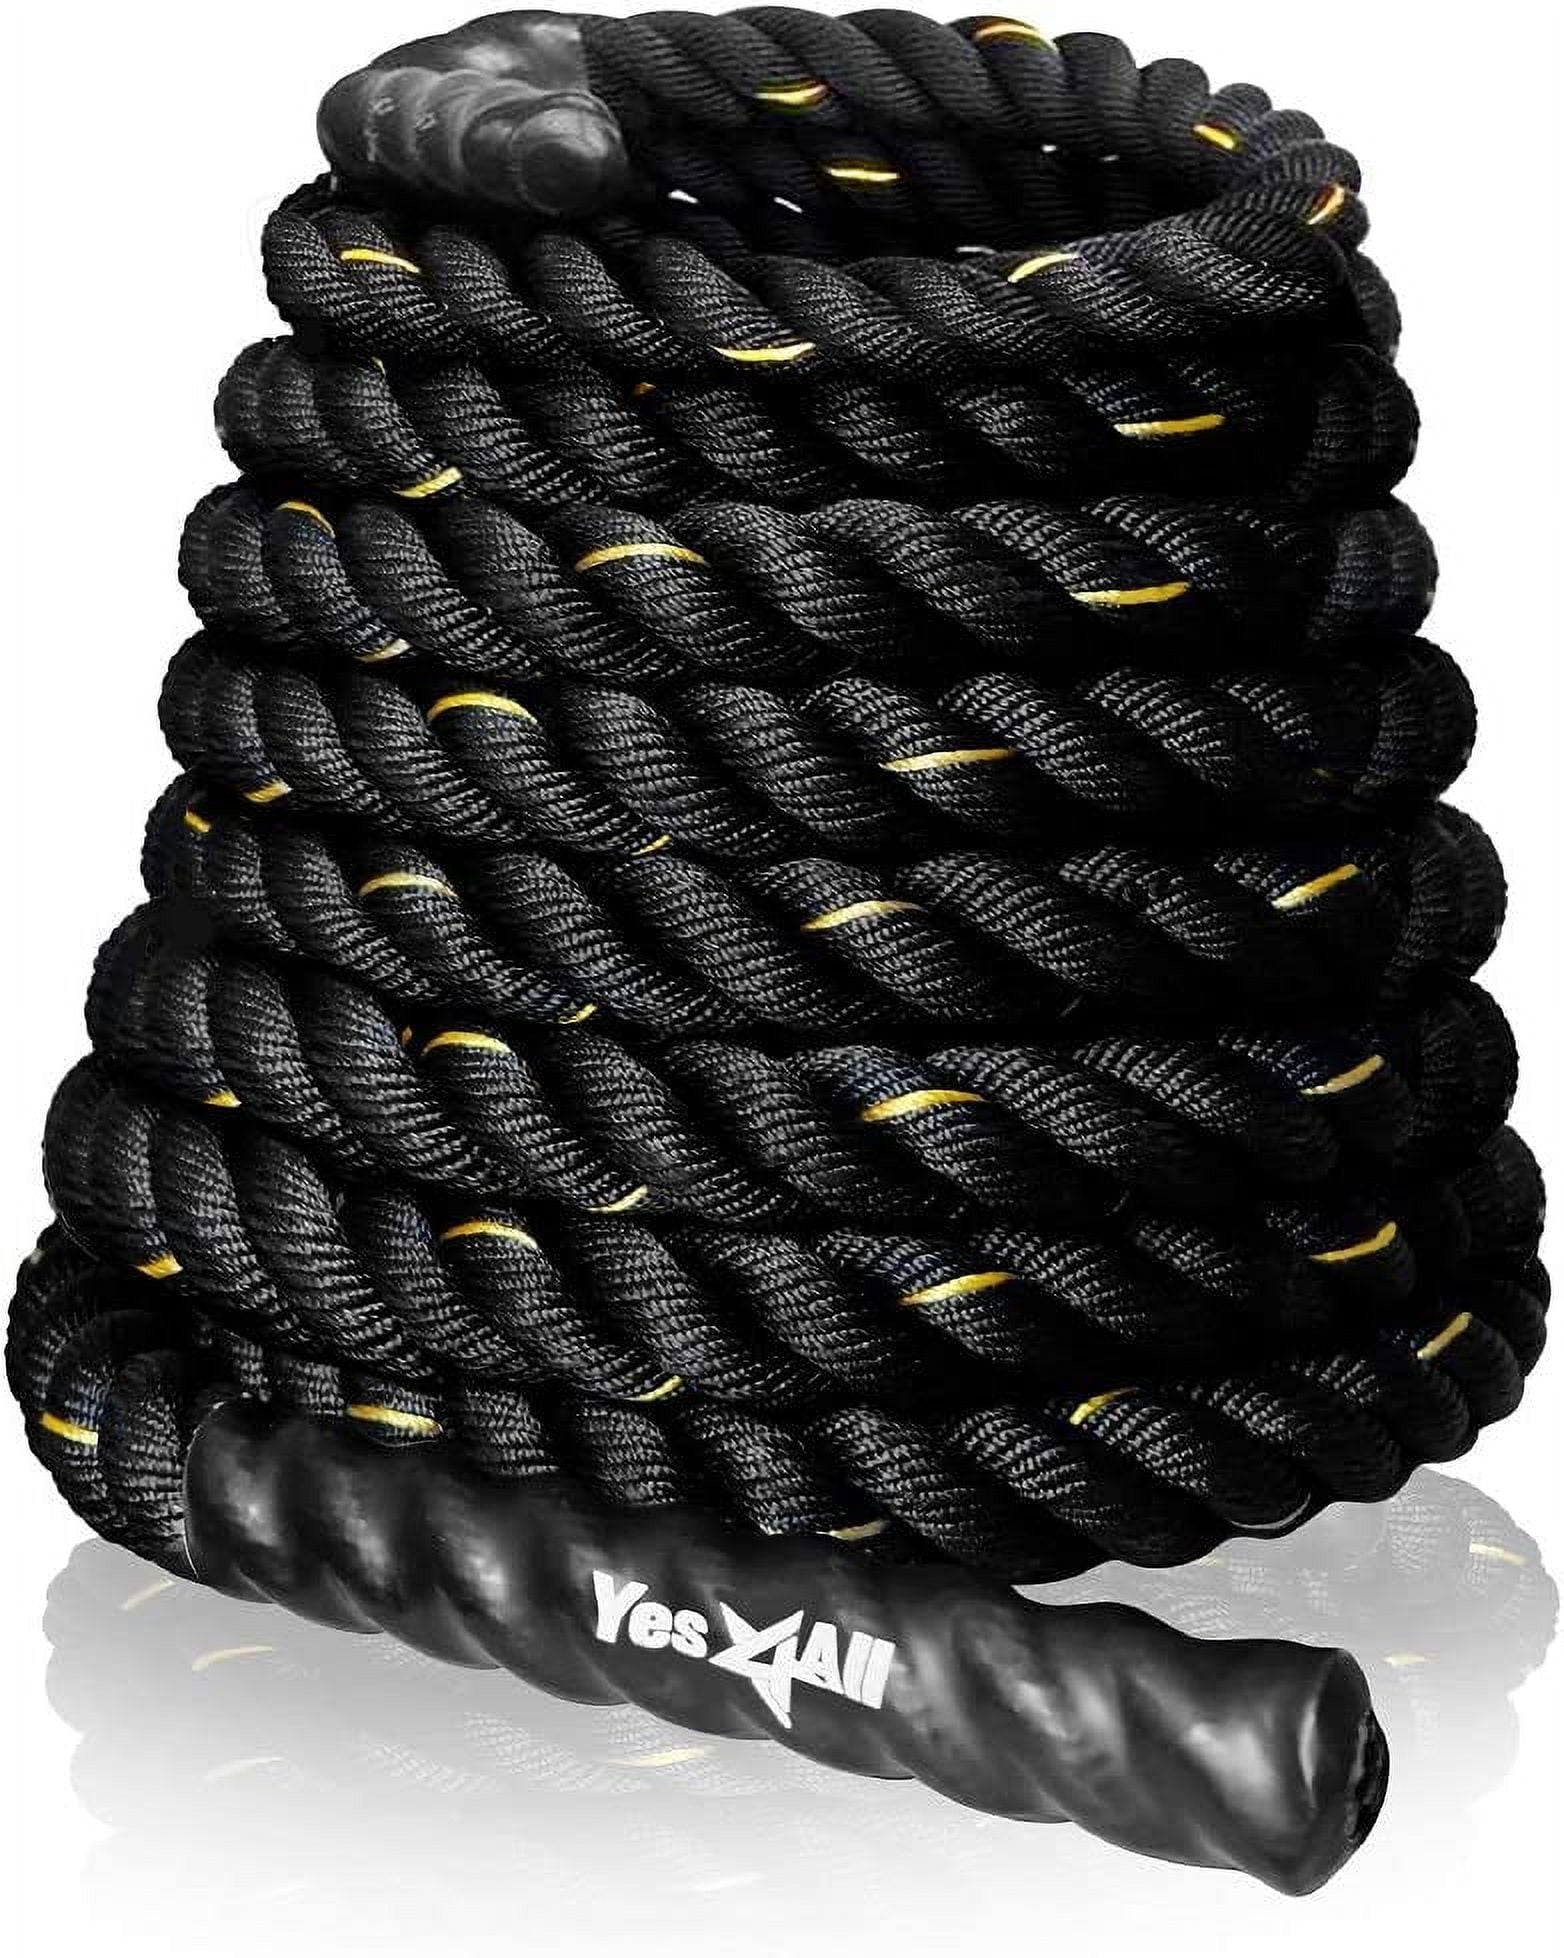 Yes4All Battle Rope 1.5/2 Inch Diameter Poly Dacron 30, 40, 50 Ft